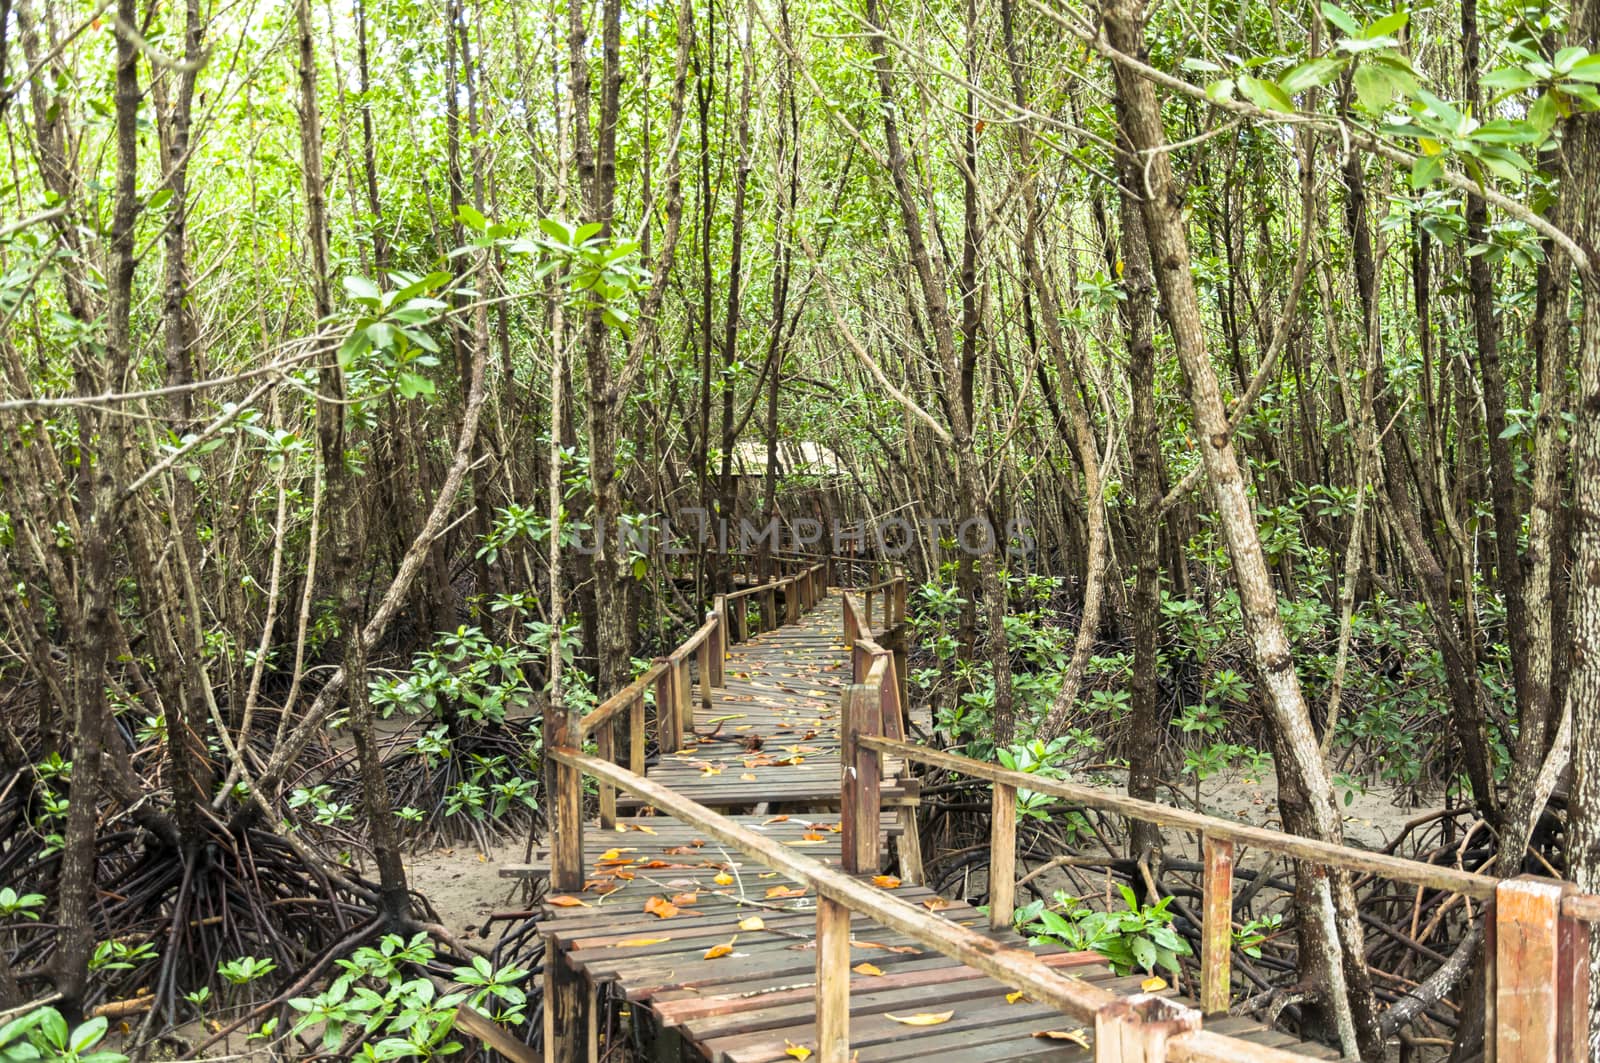 Wood corridor at mangrove forest among the trees